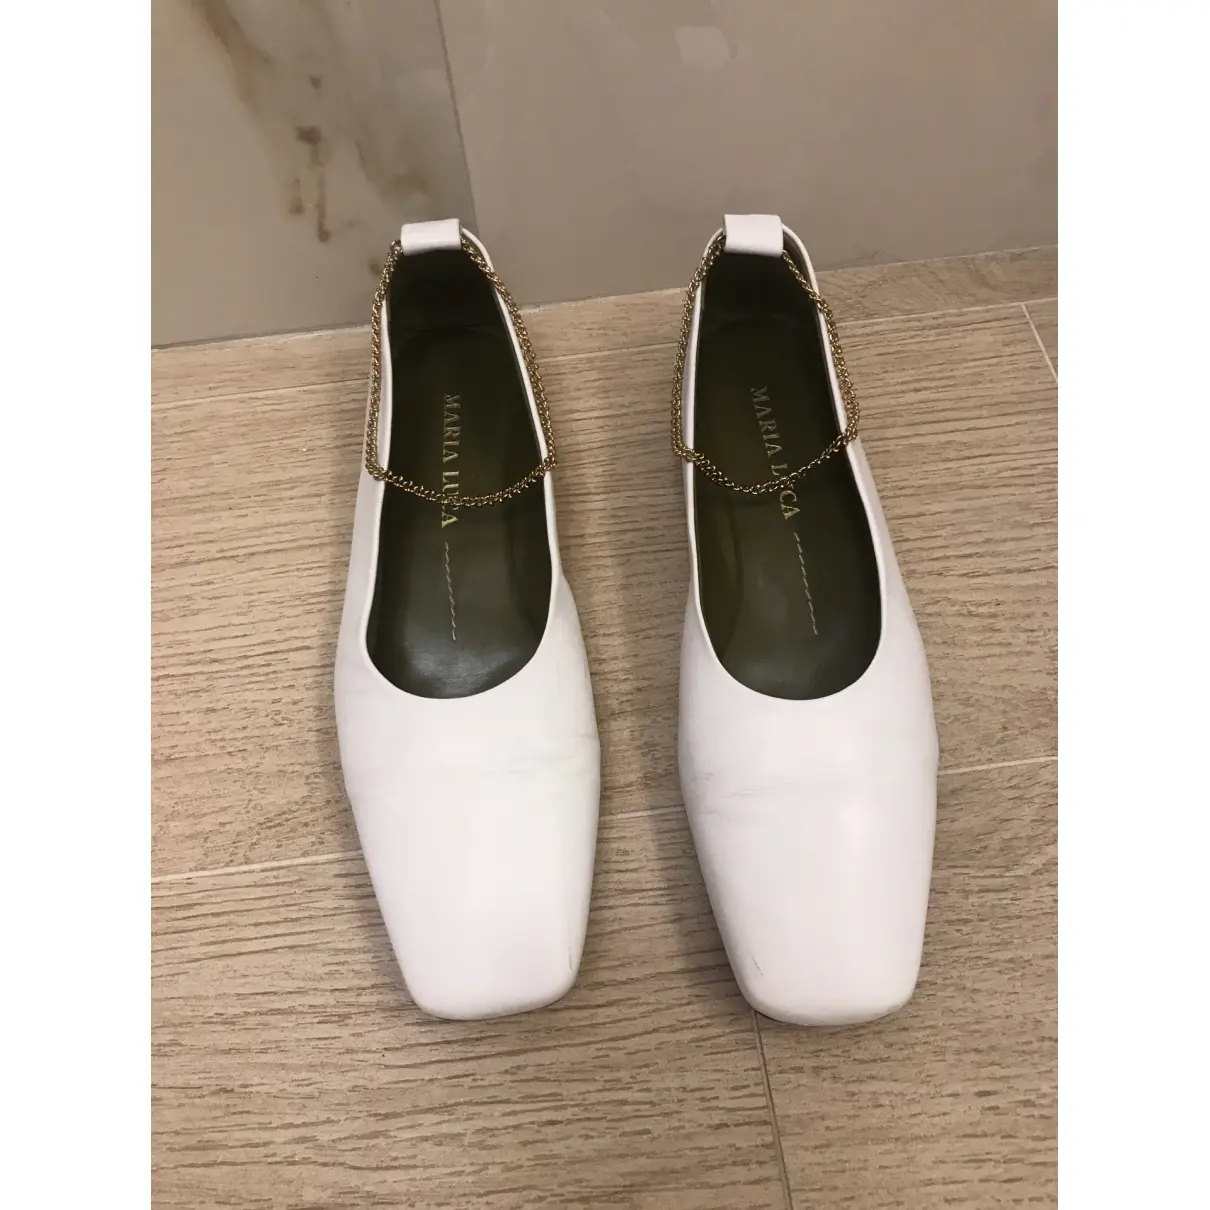 Buy Maria Luca Leather ballet flats online